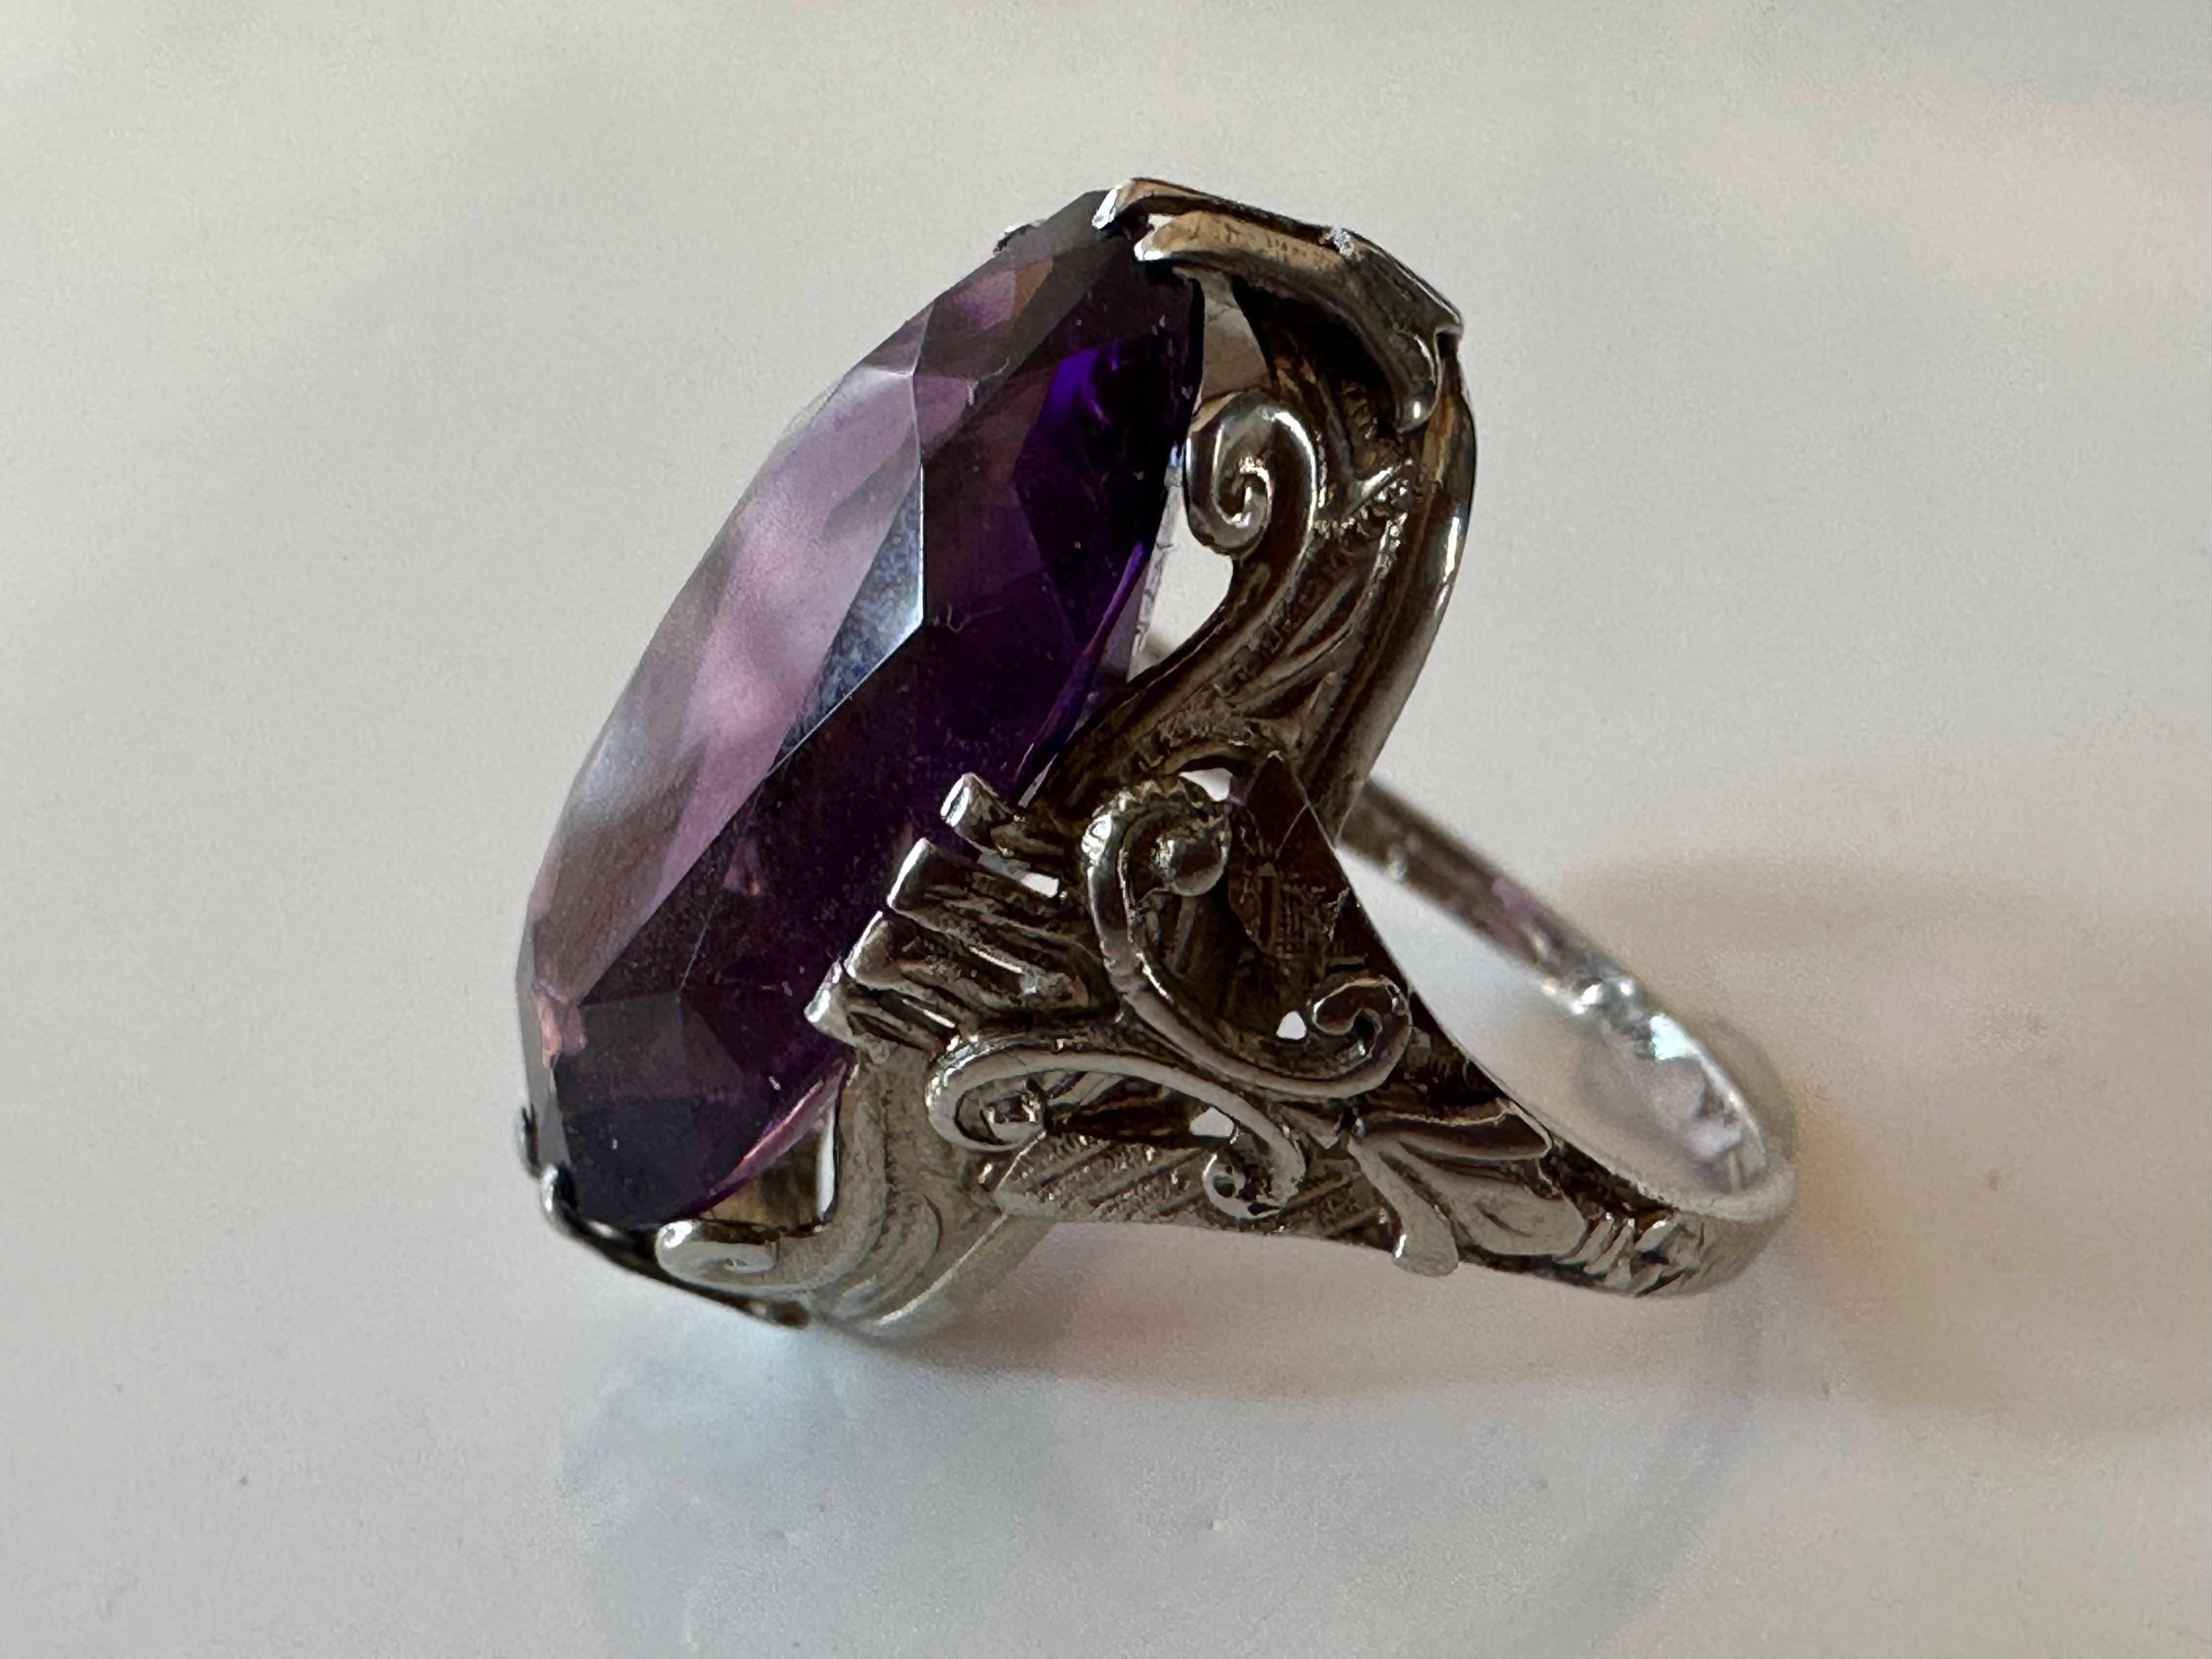 Likely crafted in the early twentieth century, this antique ring features a natural elongated oval amethyst measuring approximately 10x17.5mm presented in a 10K white gold mounting embellished with hand-engraved details. 

